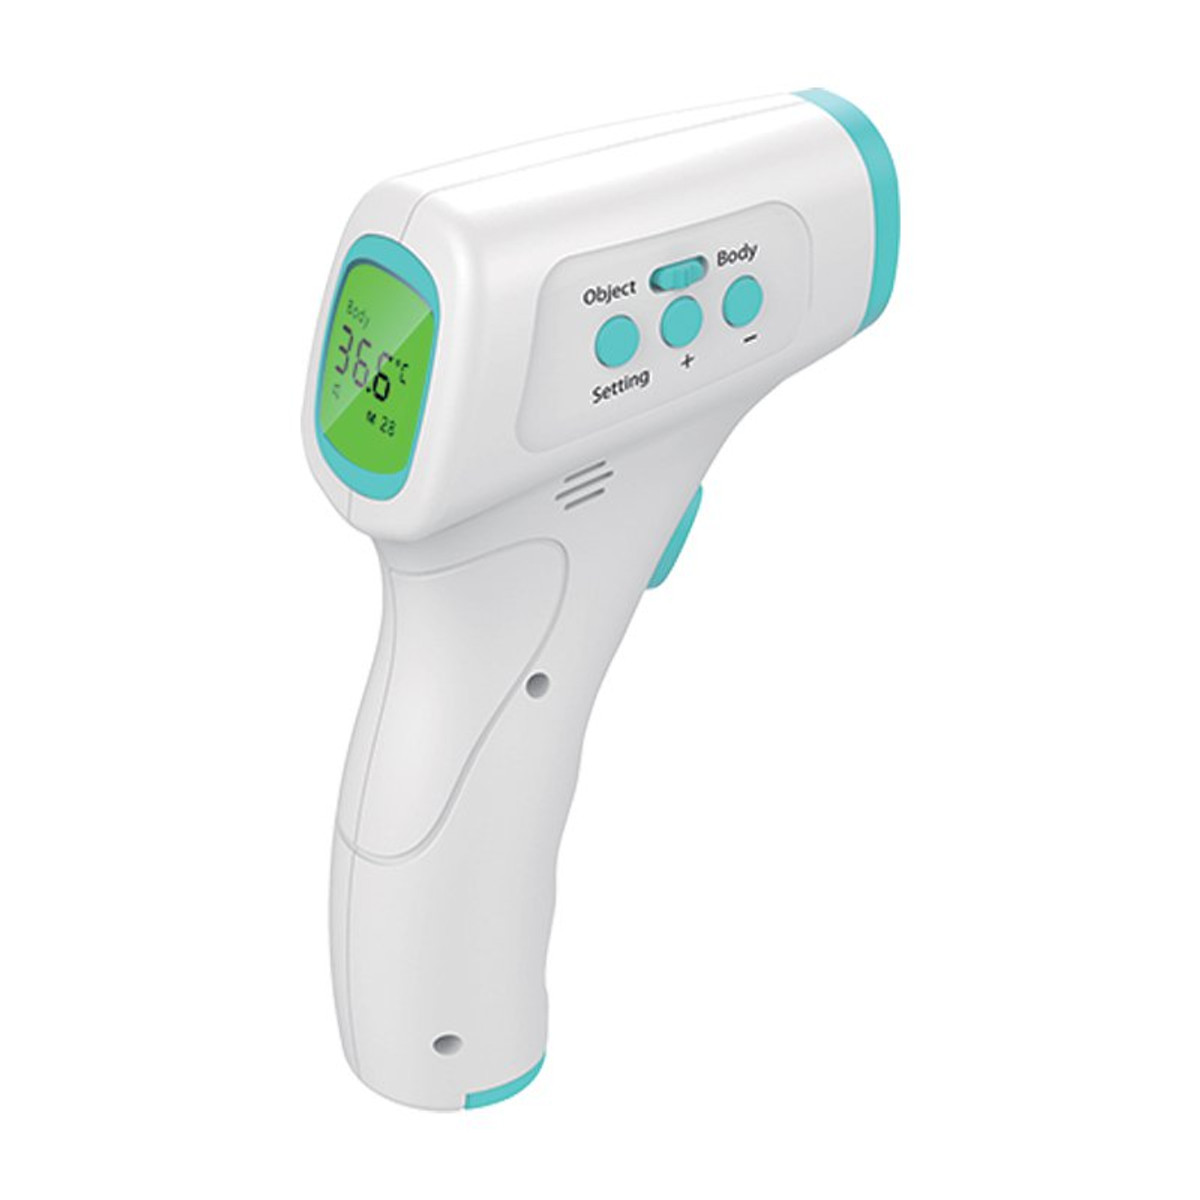 Non Contact Forehead Thermometer - Color Coded Fever Warning - 1 Second Accurate